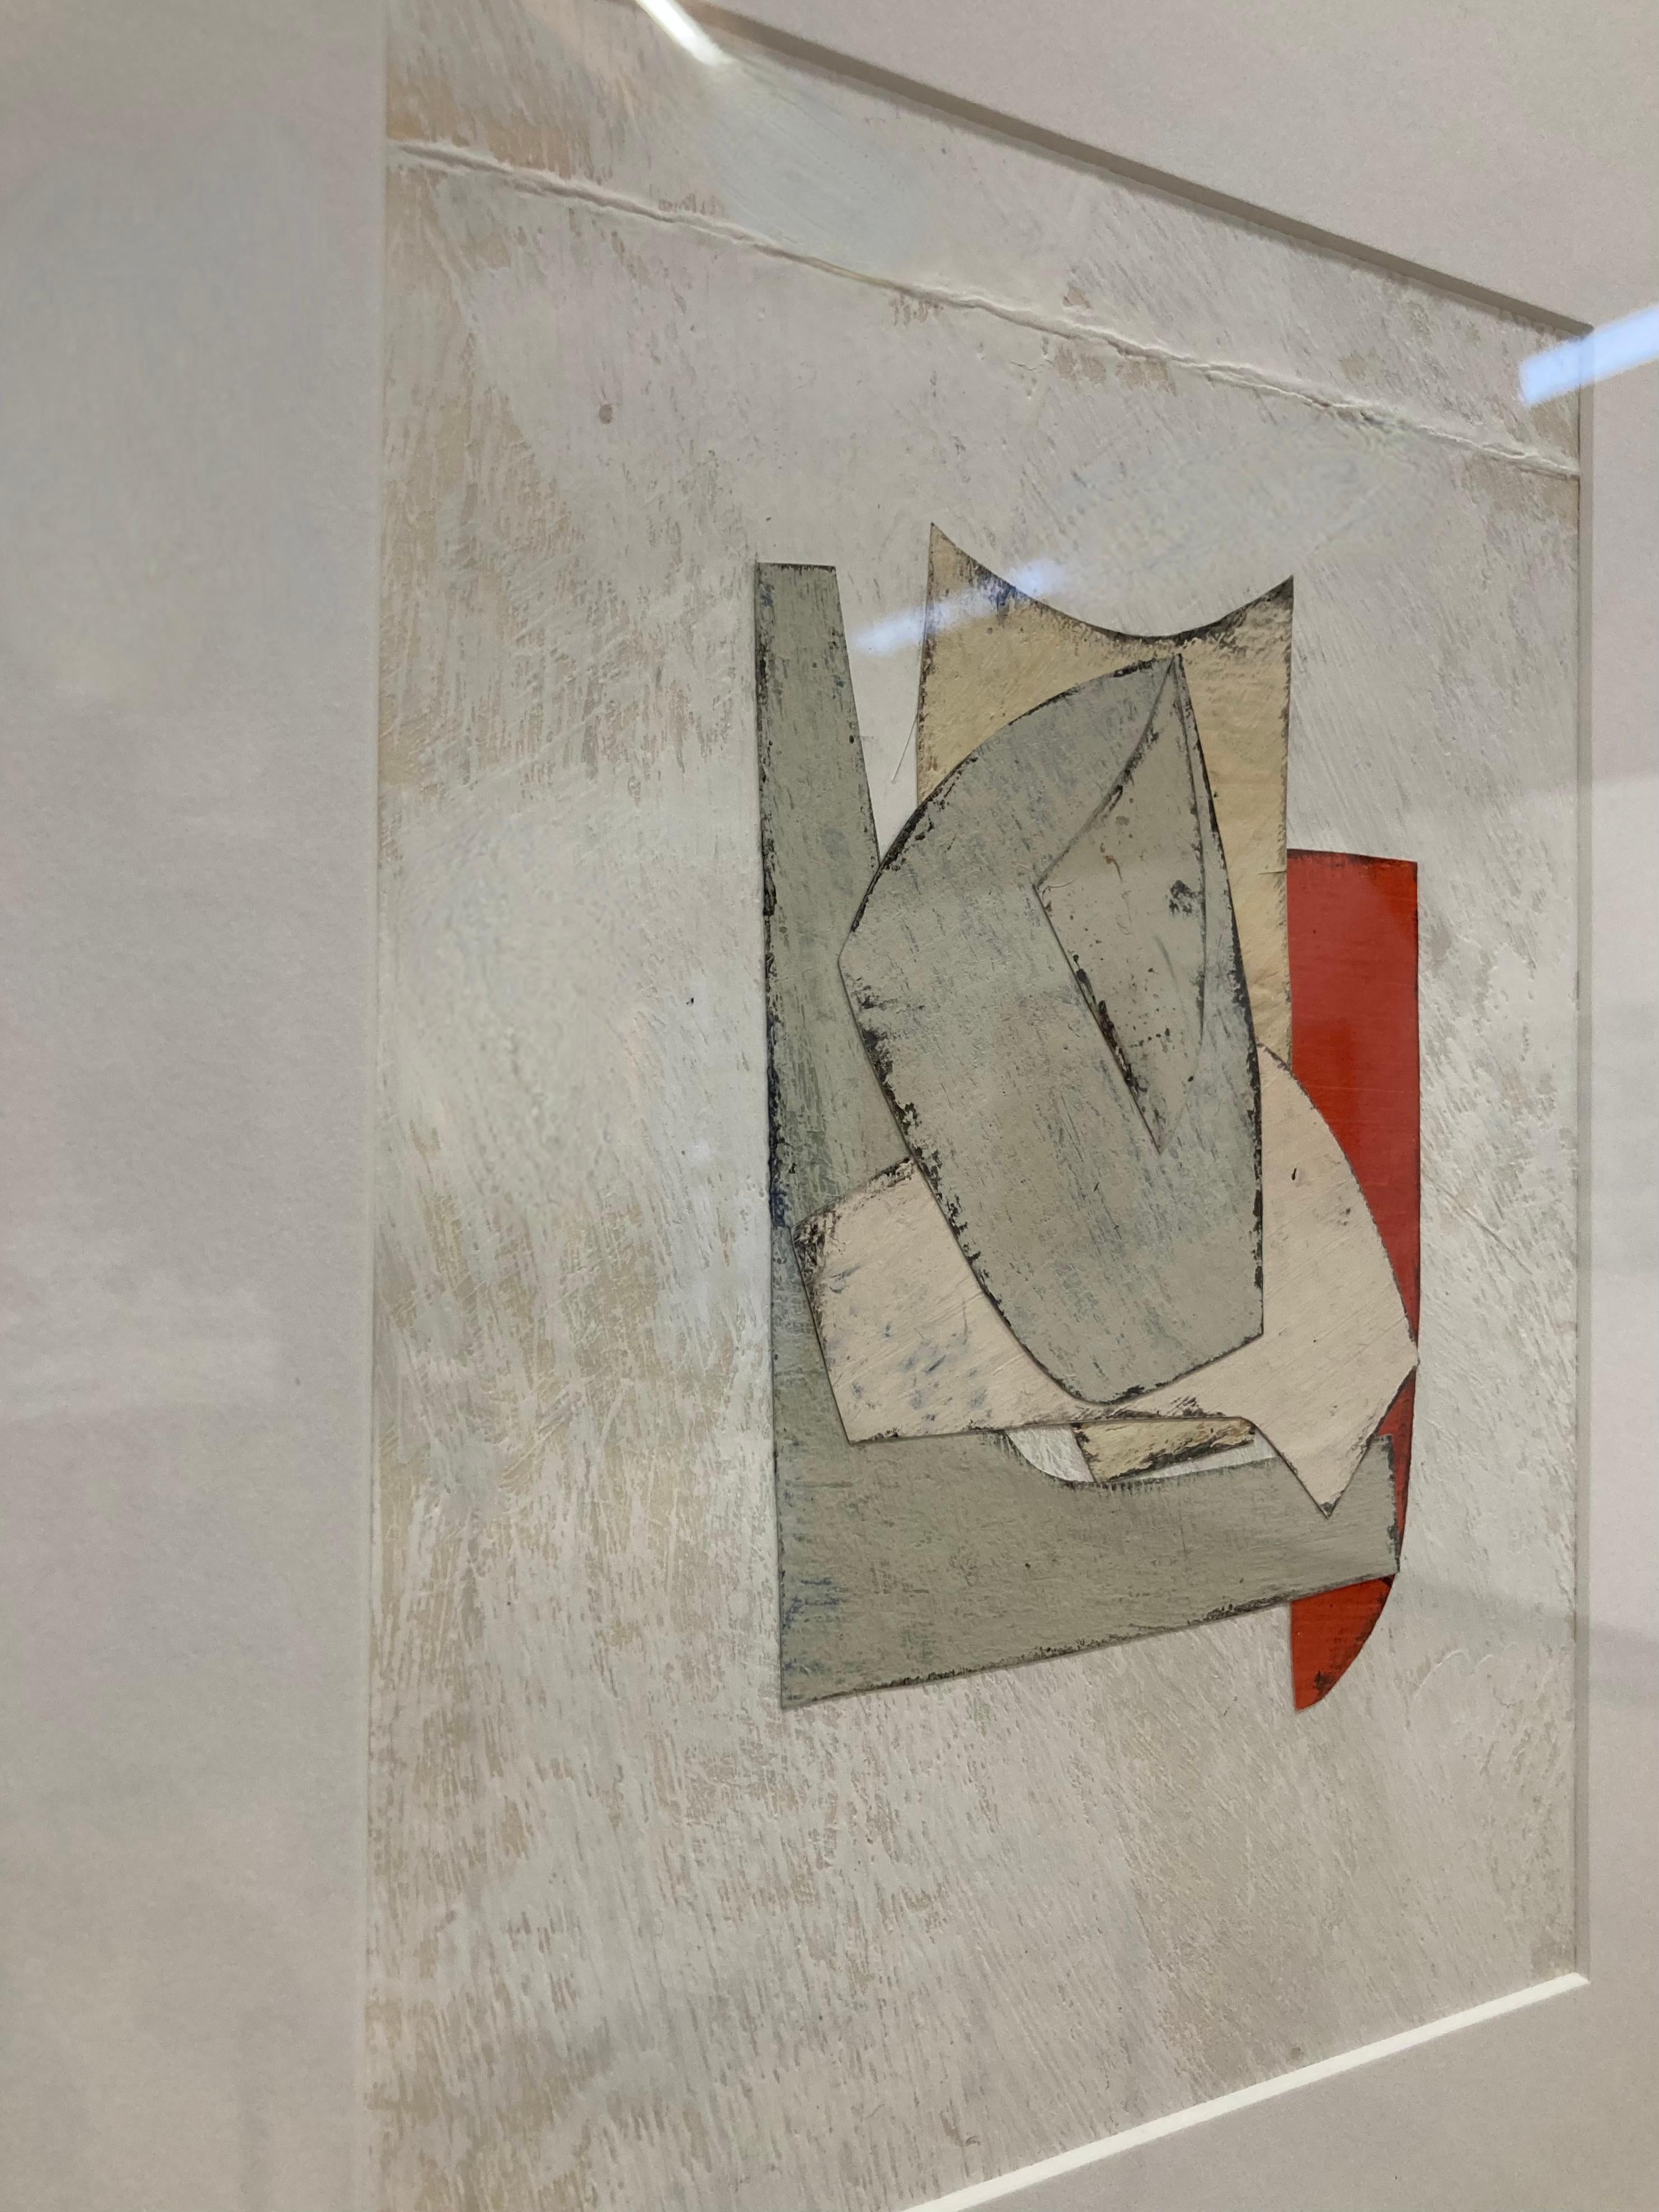 Daniel Anselmi uses painting and collage to explore the various ways in which color, line, and form can be expressed abstractly. 

In this vertical painted paper collage on paper, smooth curvilinear and sharp angular forms intersect and overlap one